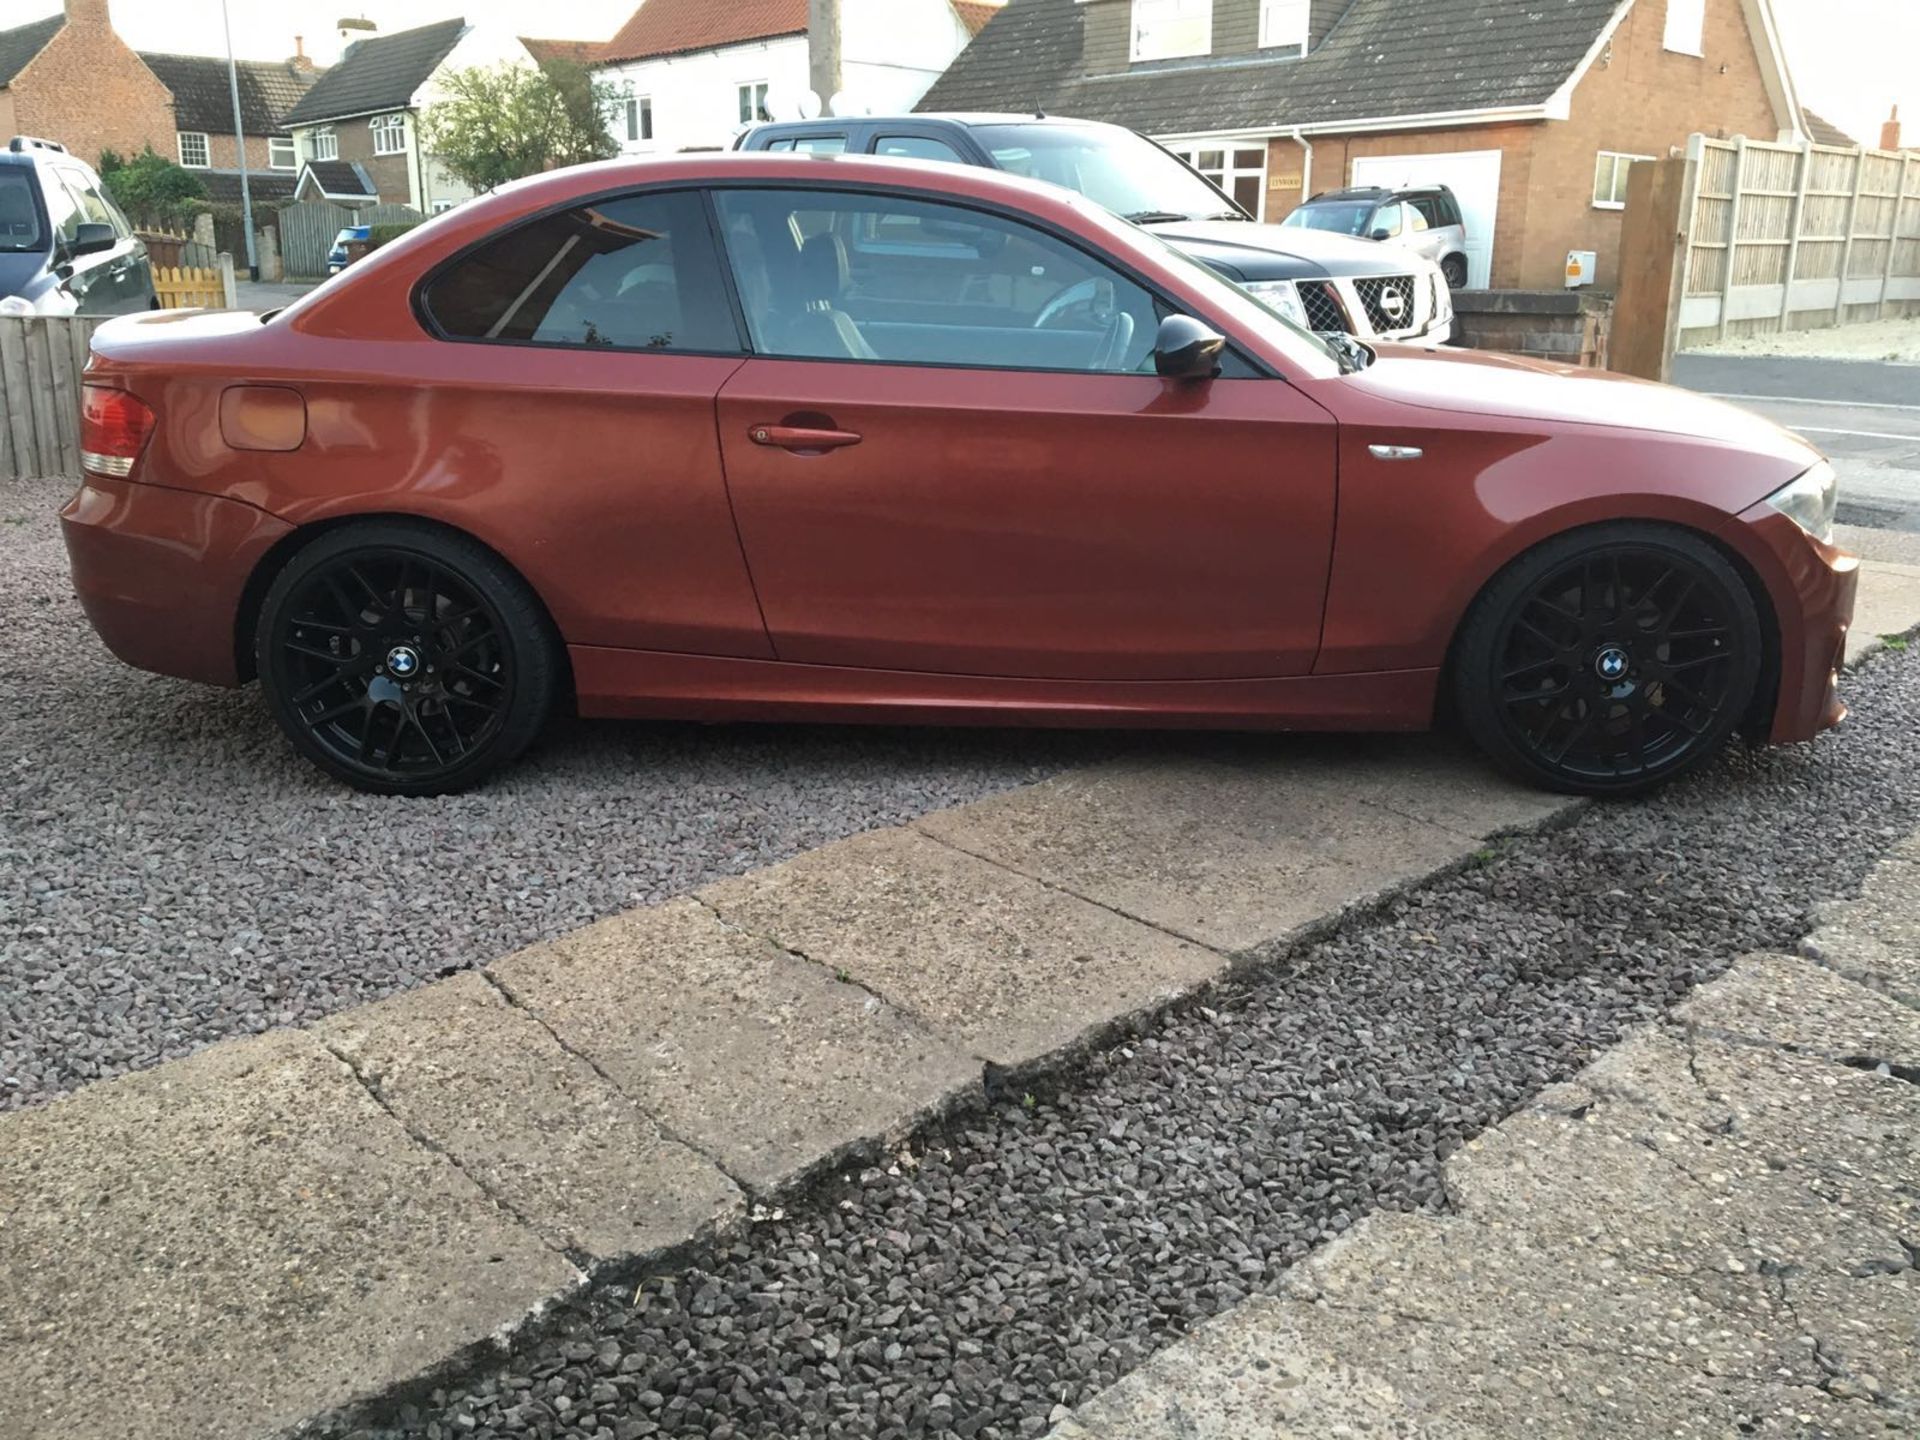 2008 BMW 123D M SPORT COUPE - 6 SPEED MANUAL GEARBOX *NO VAT* - Image 6 of 11